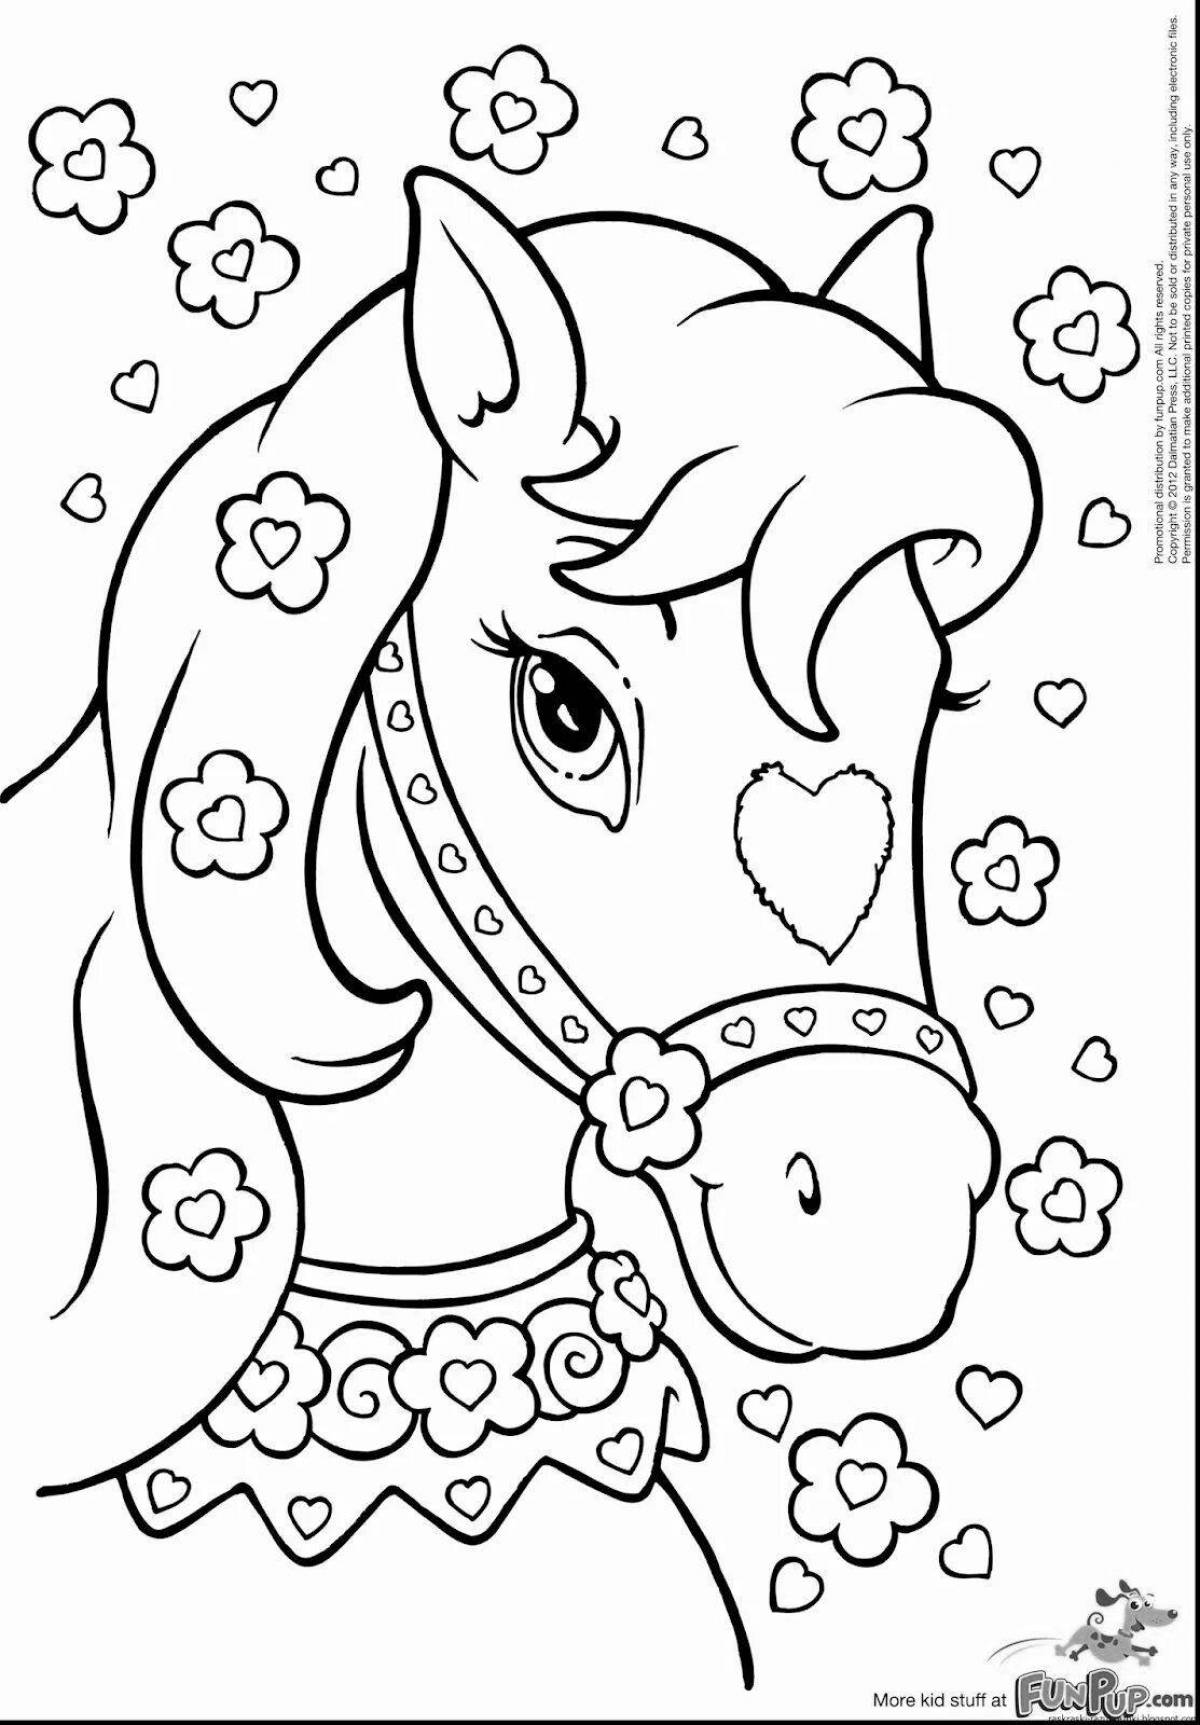 Commemorative coloring game for girls 4-5 years old